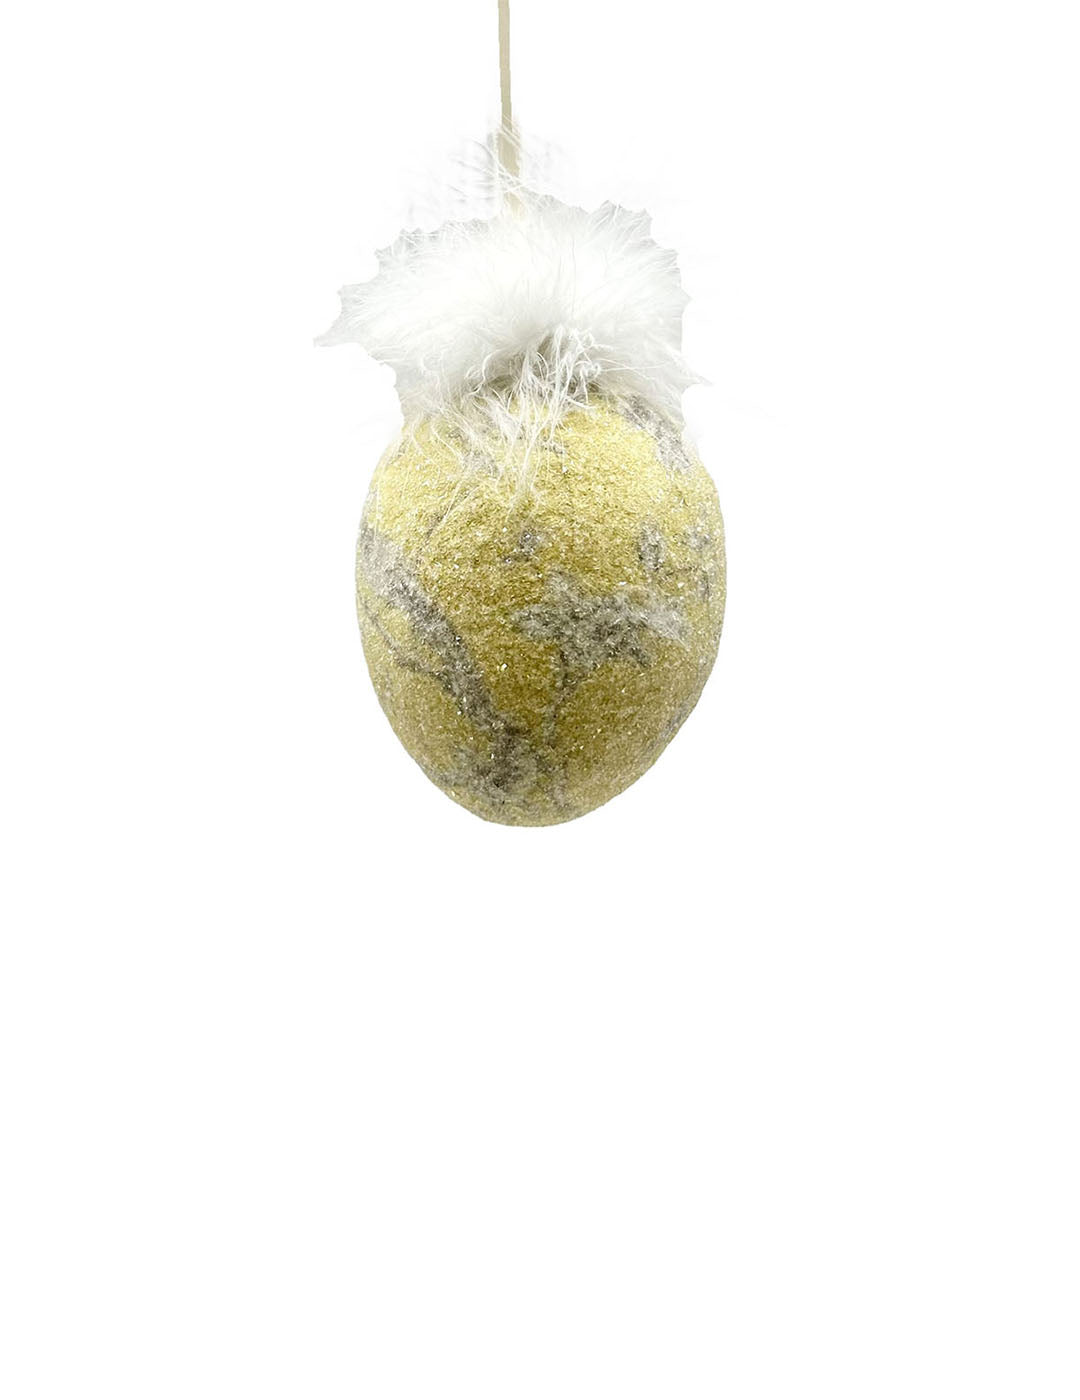 Decoupage Egg Ornament - Small, Yellow Chinoiserie